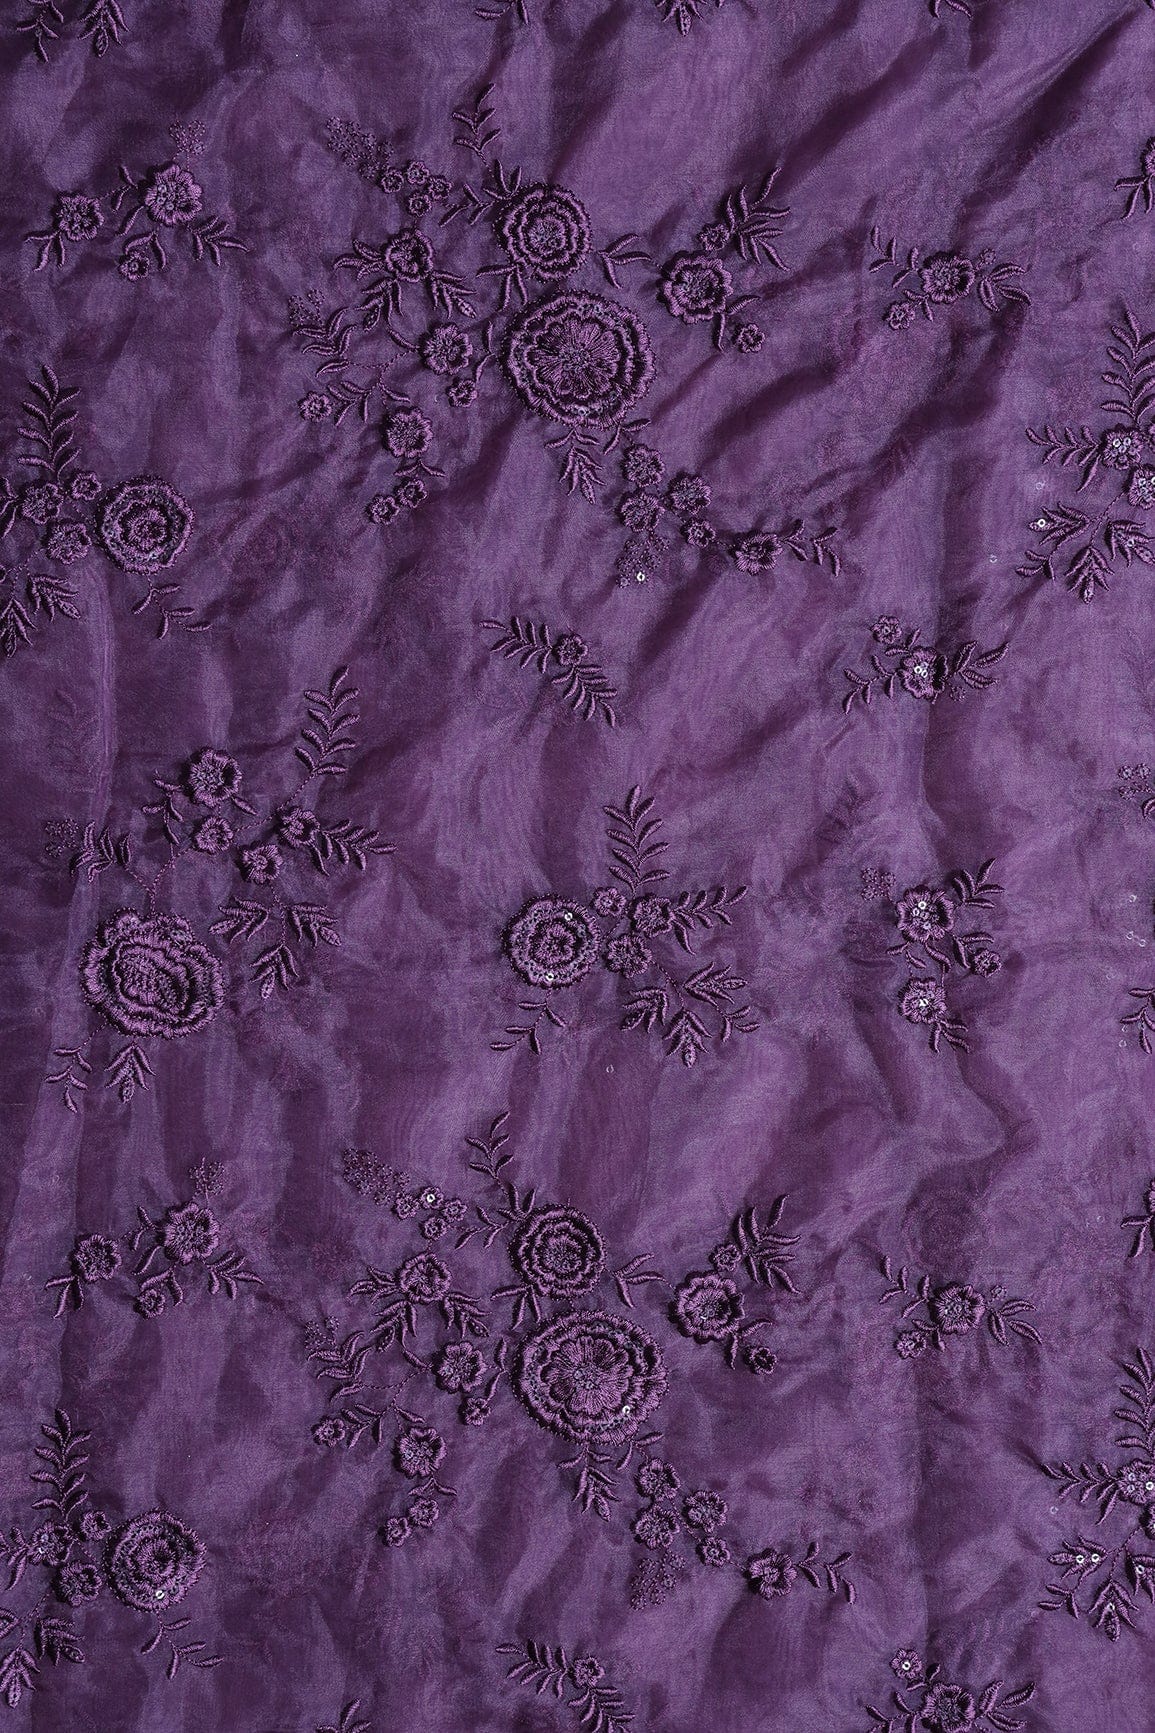 doeraa Embroidery Fabrics Purple Thread With Water Sequins Floral Embroidery Work On Purple Organza Fabric